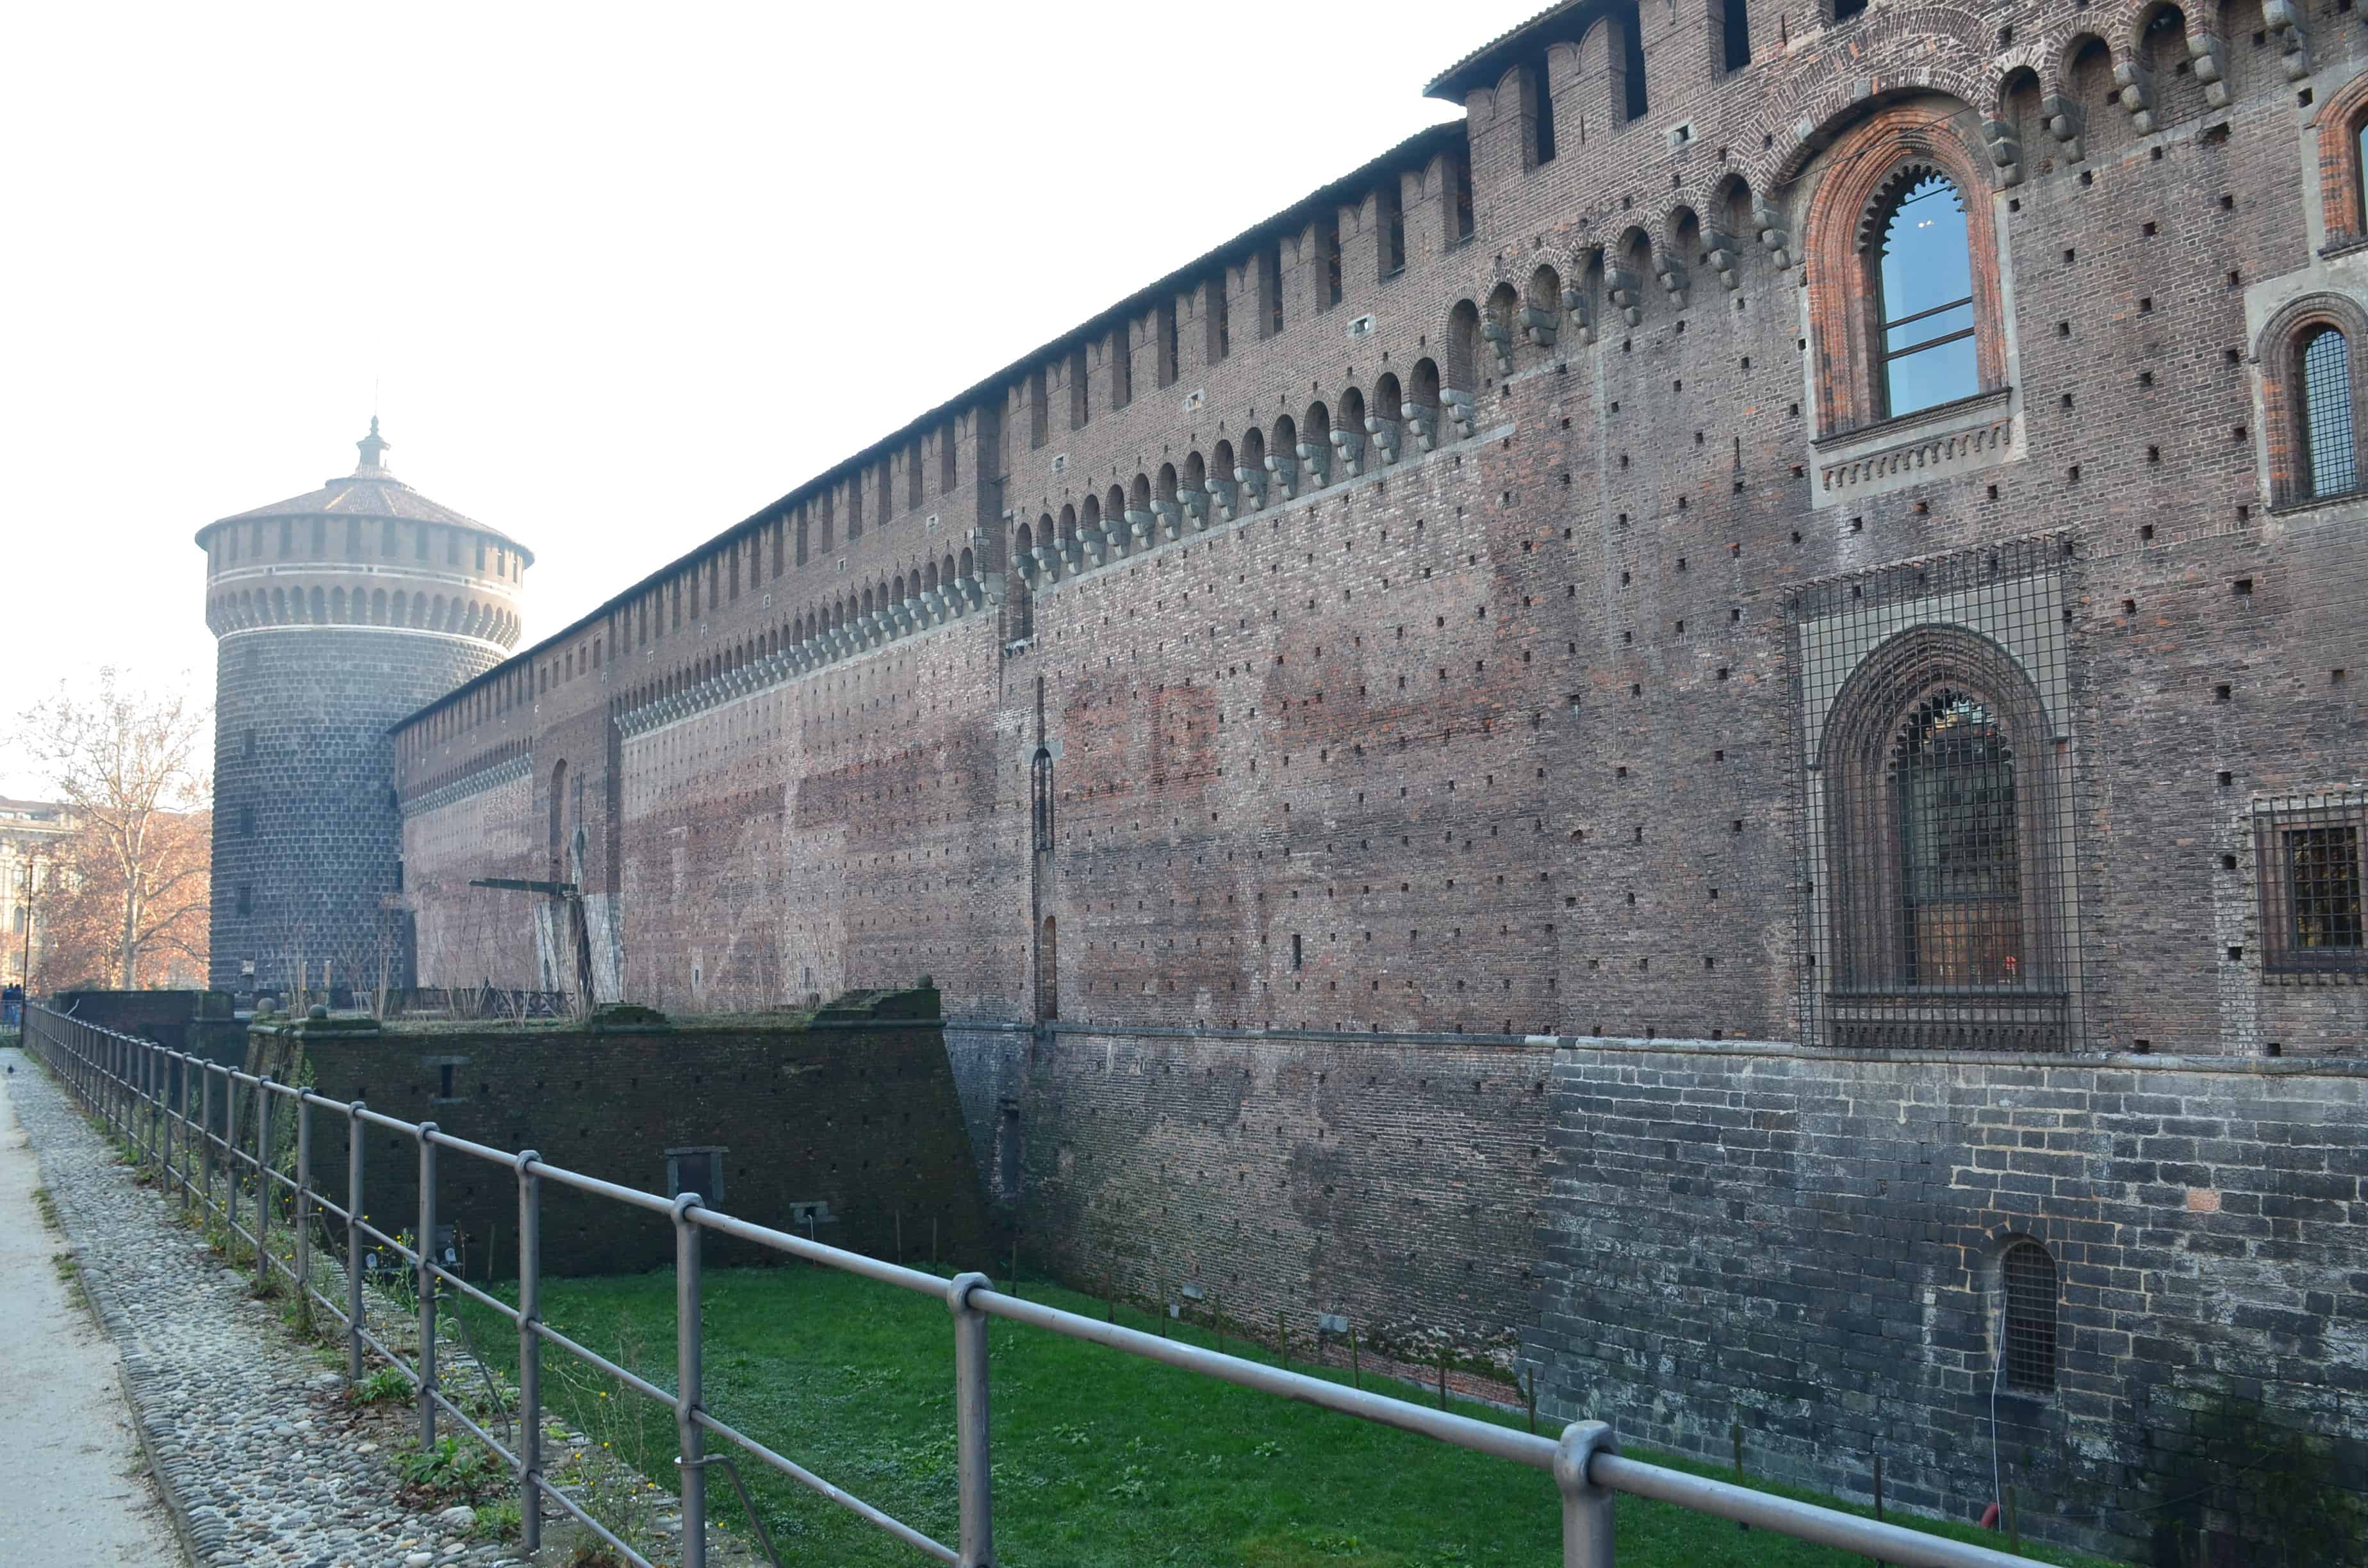 Defensive walls looking towards the Carmine Tower at Sforza Castle in Milan, Italy